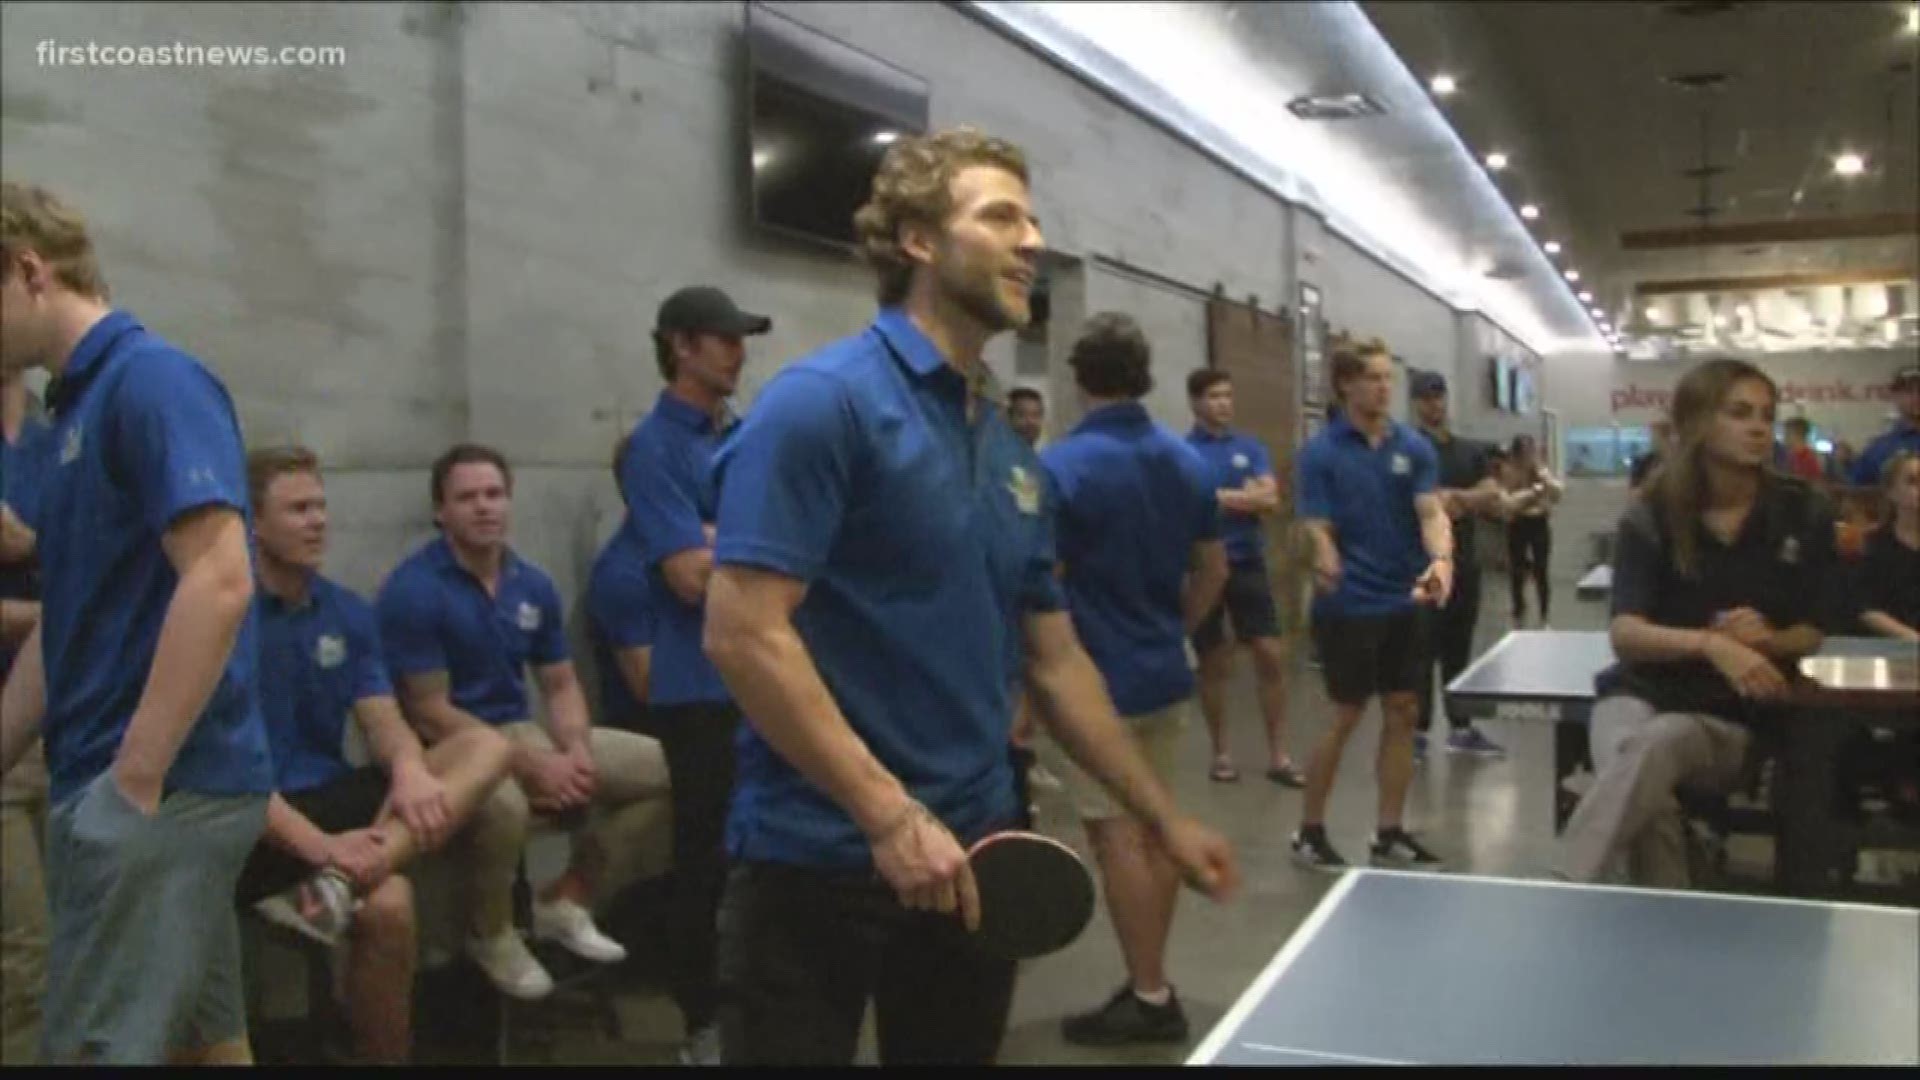 The Jacksonville Icemen hosted a ping-pong tournament at SMASH to raise funds for the Muscular Dystrophy Association.